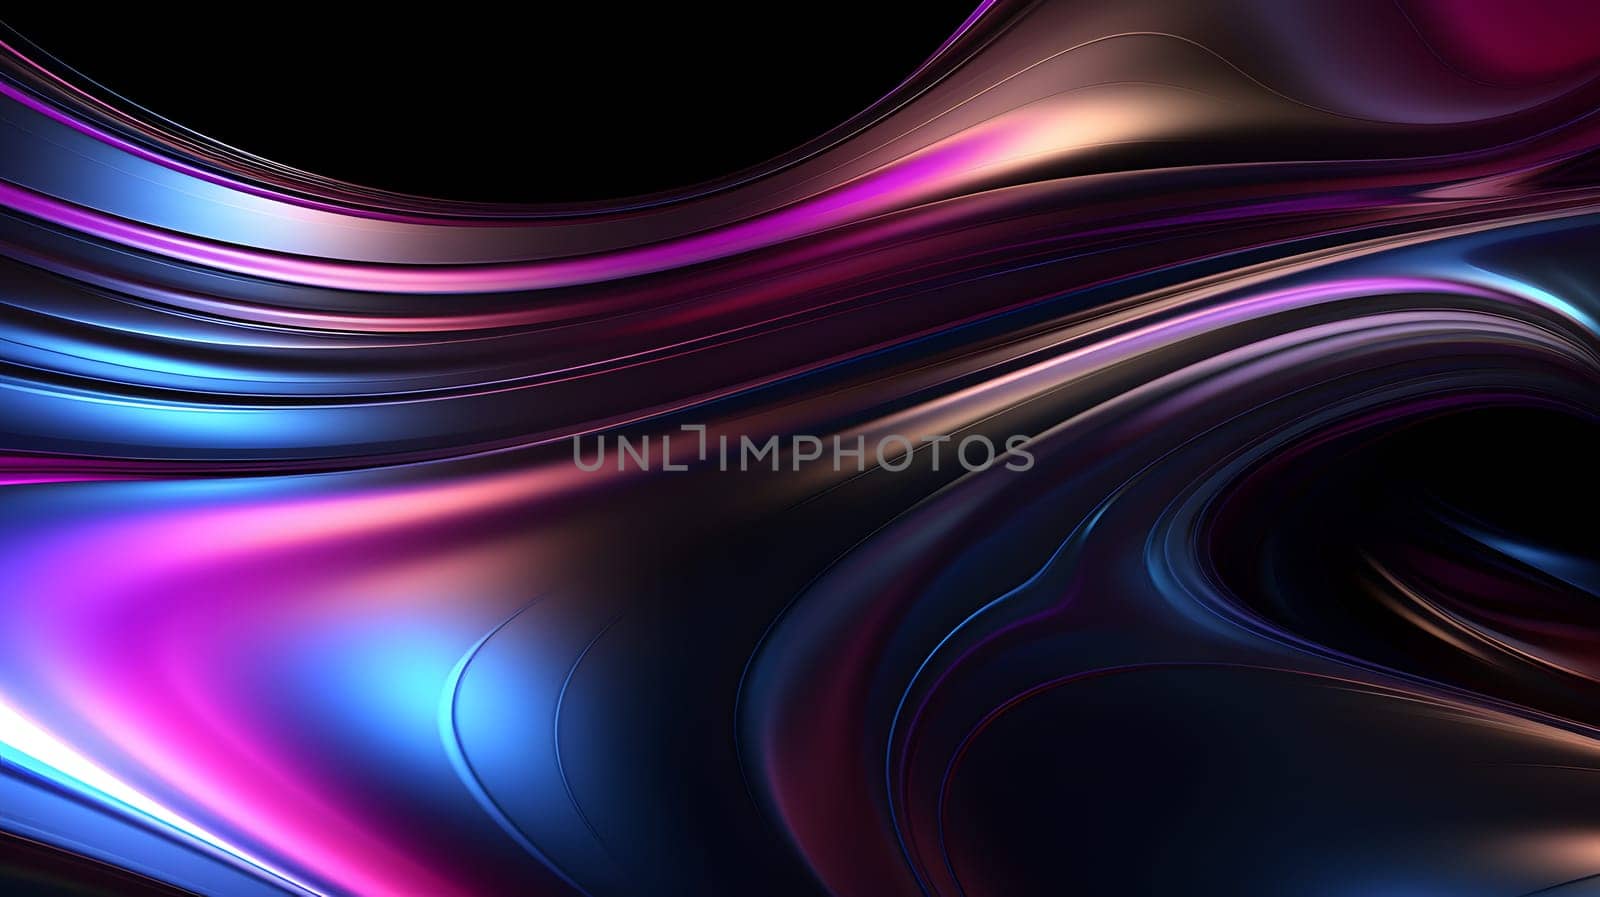 Abstract background of dark metallic holographic liquid metal with mild rainbow reflective waves. Neural network generated image. Not based on any actual pattern or scene.